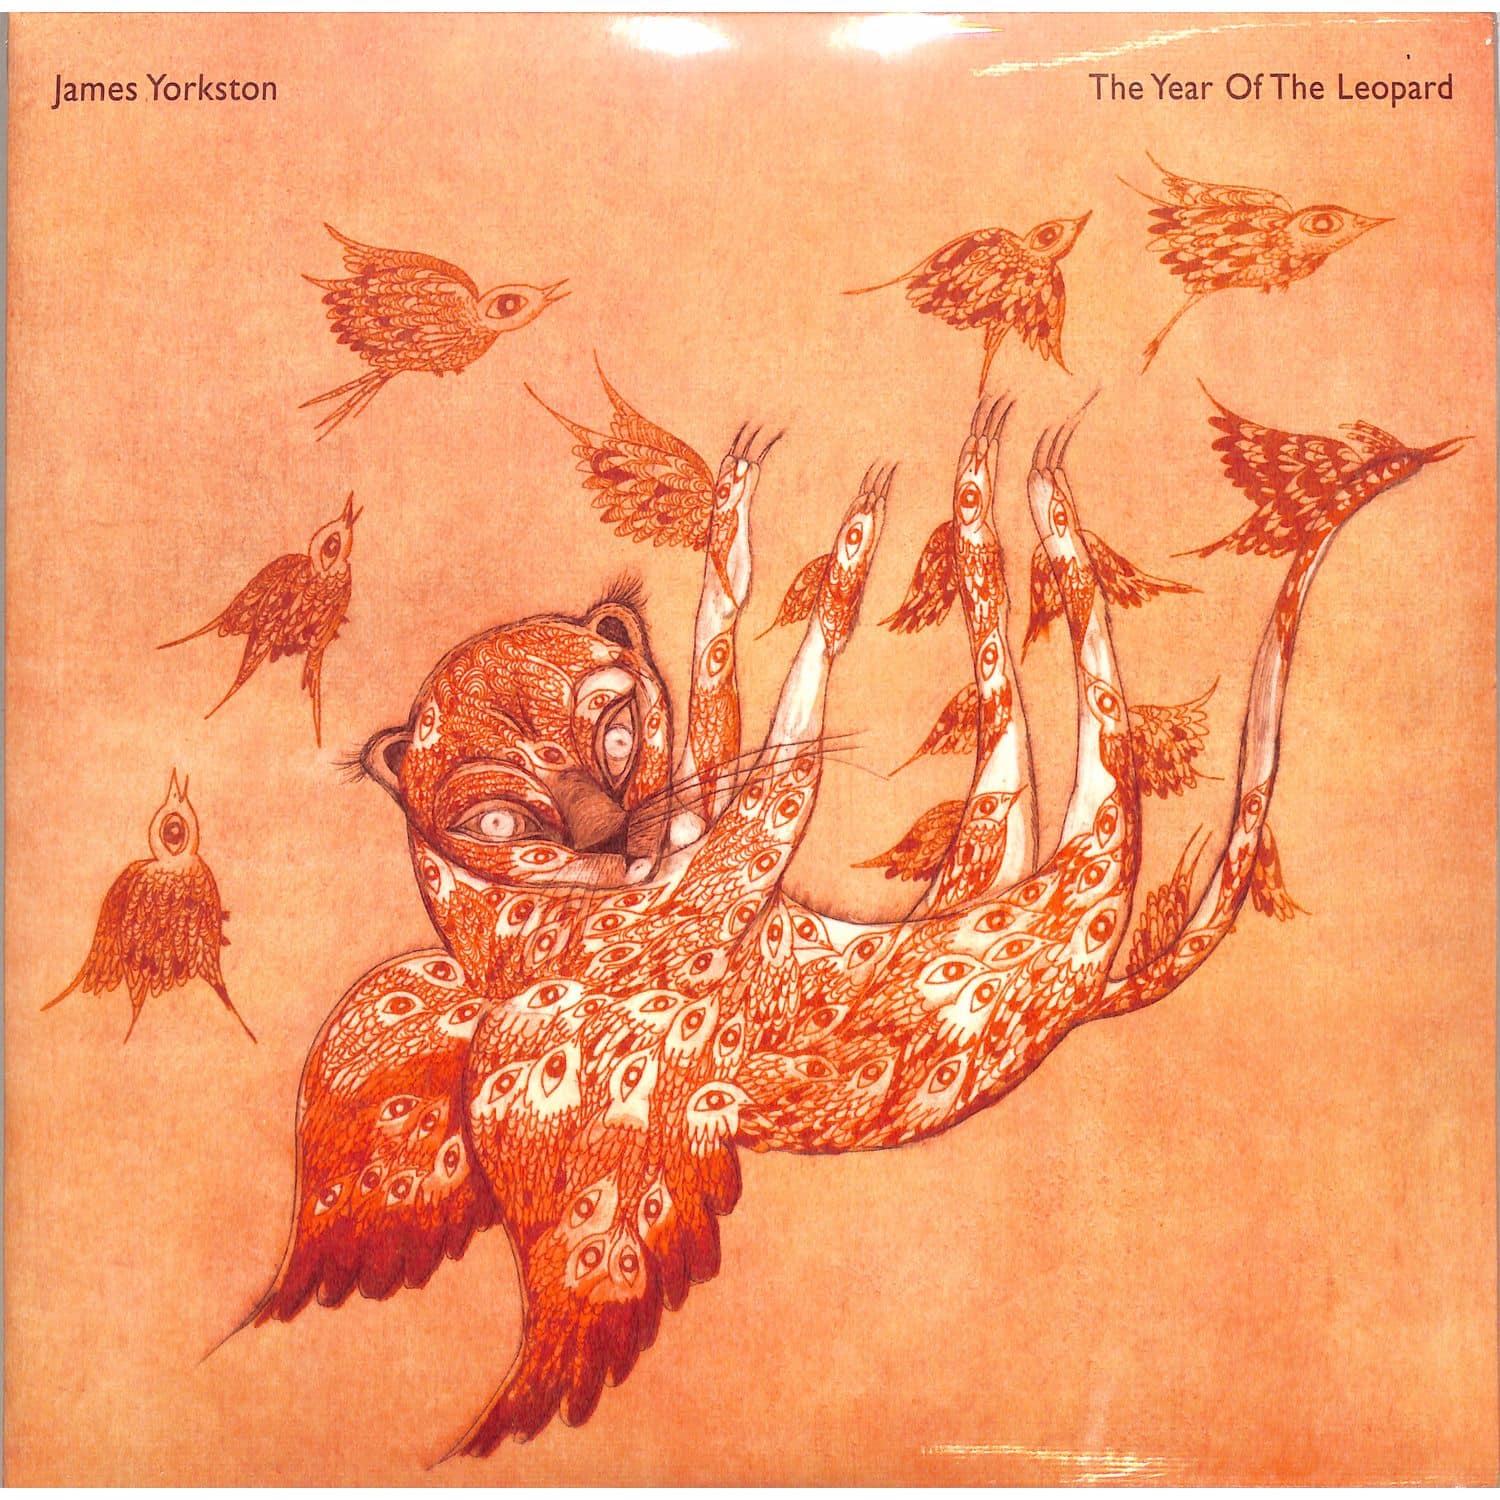  James Yorkston - THE YEAR OF THE LEOPARD 